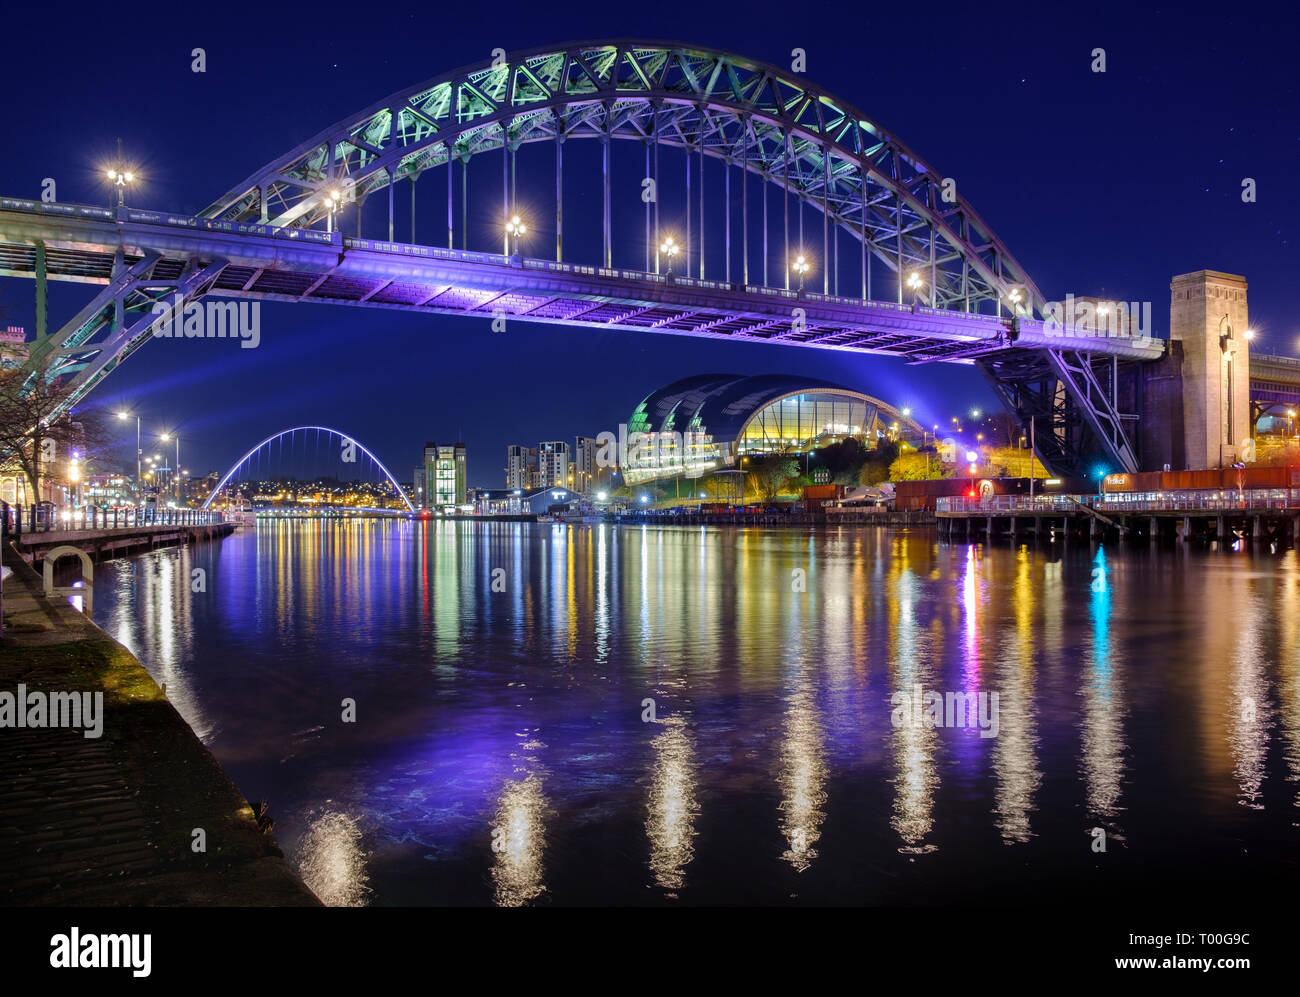 After dark river Tyne bridges between Newcastle Gateshead spanned by the Tyne Bridge and Millennium Bridge showing the city lights at night. Stock Photo